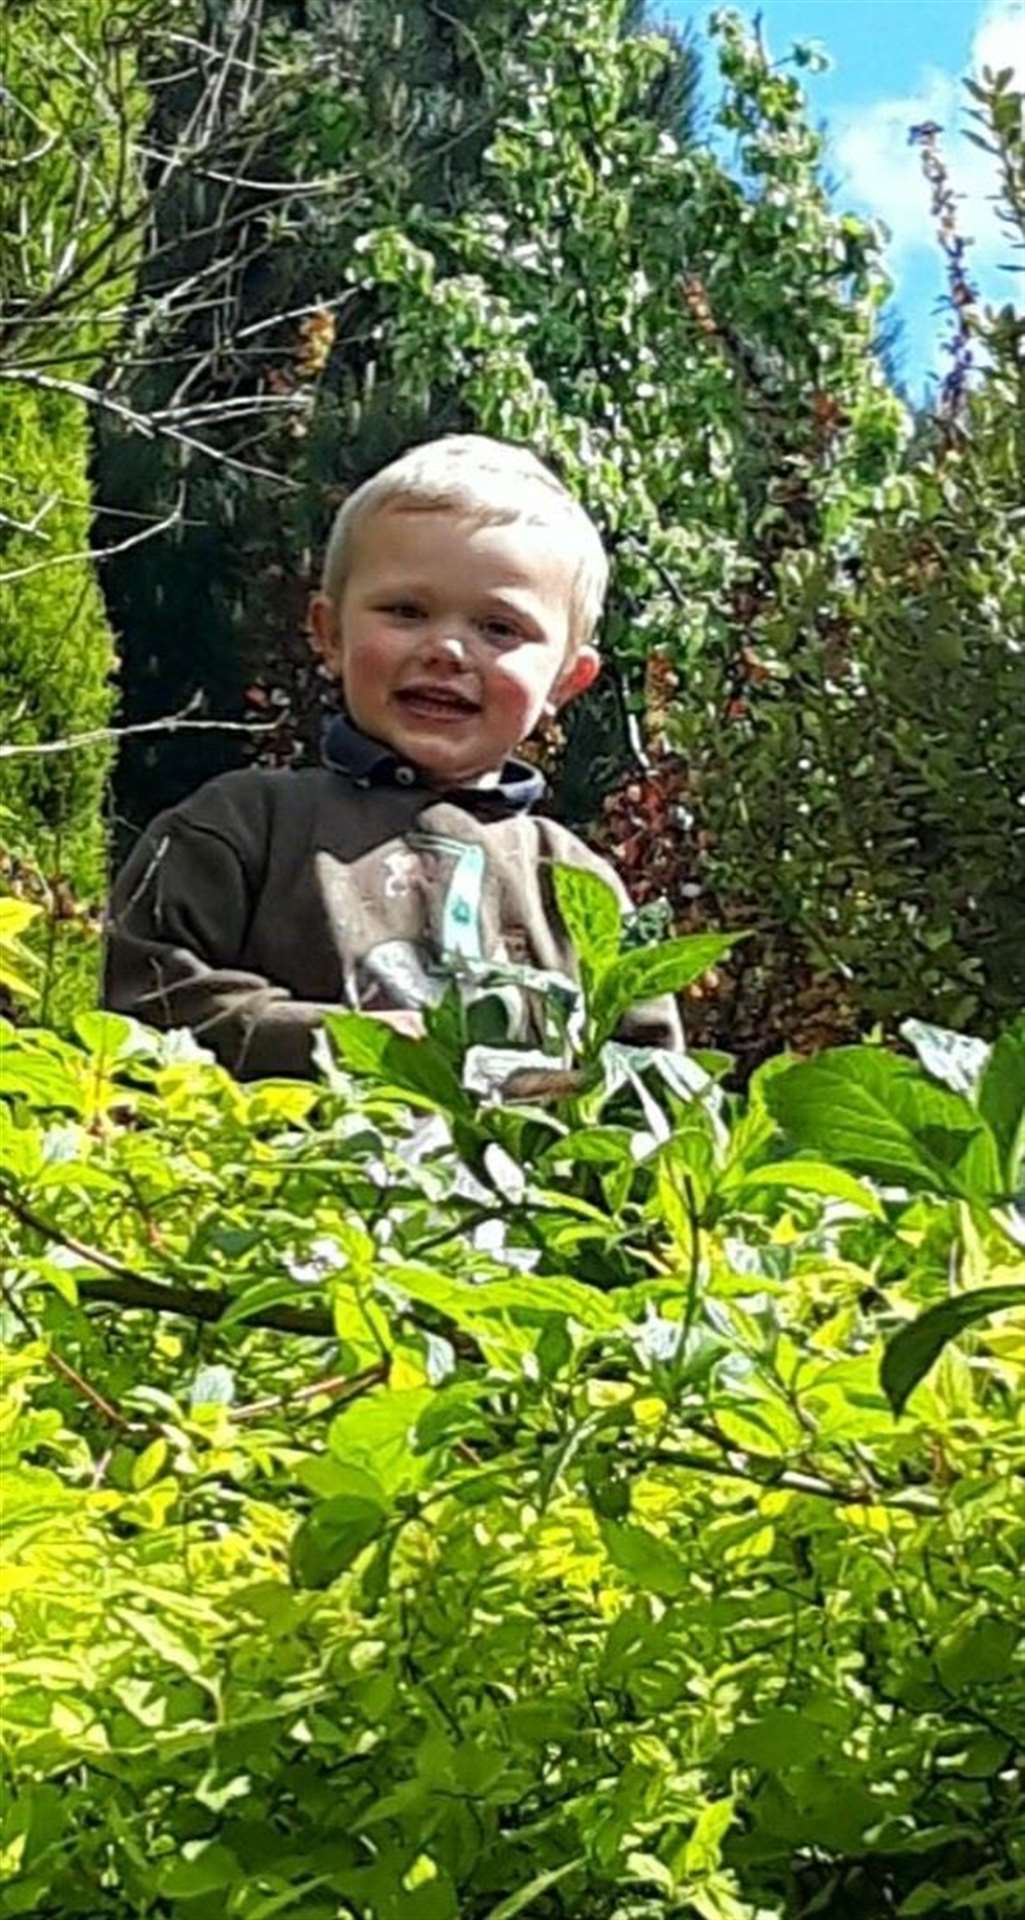 Daniel John Twigg, three, who was killed in a dog attack (Family handout/Greater Manchester Police/PA)